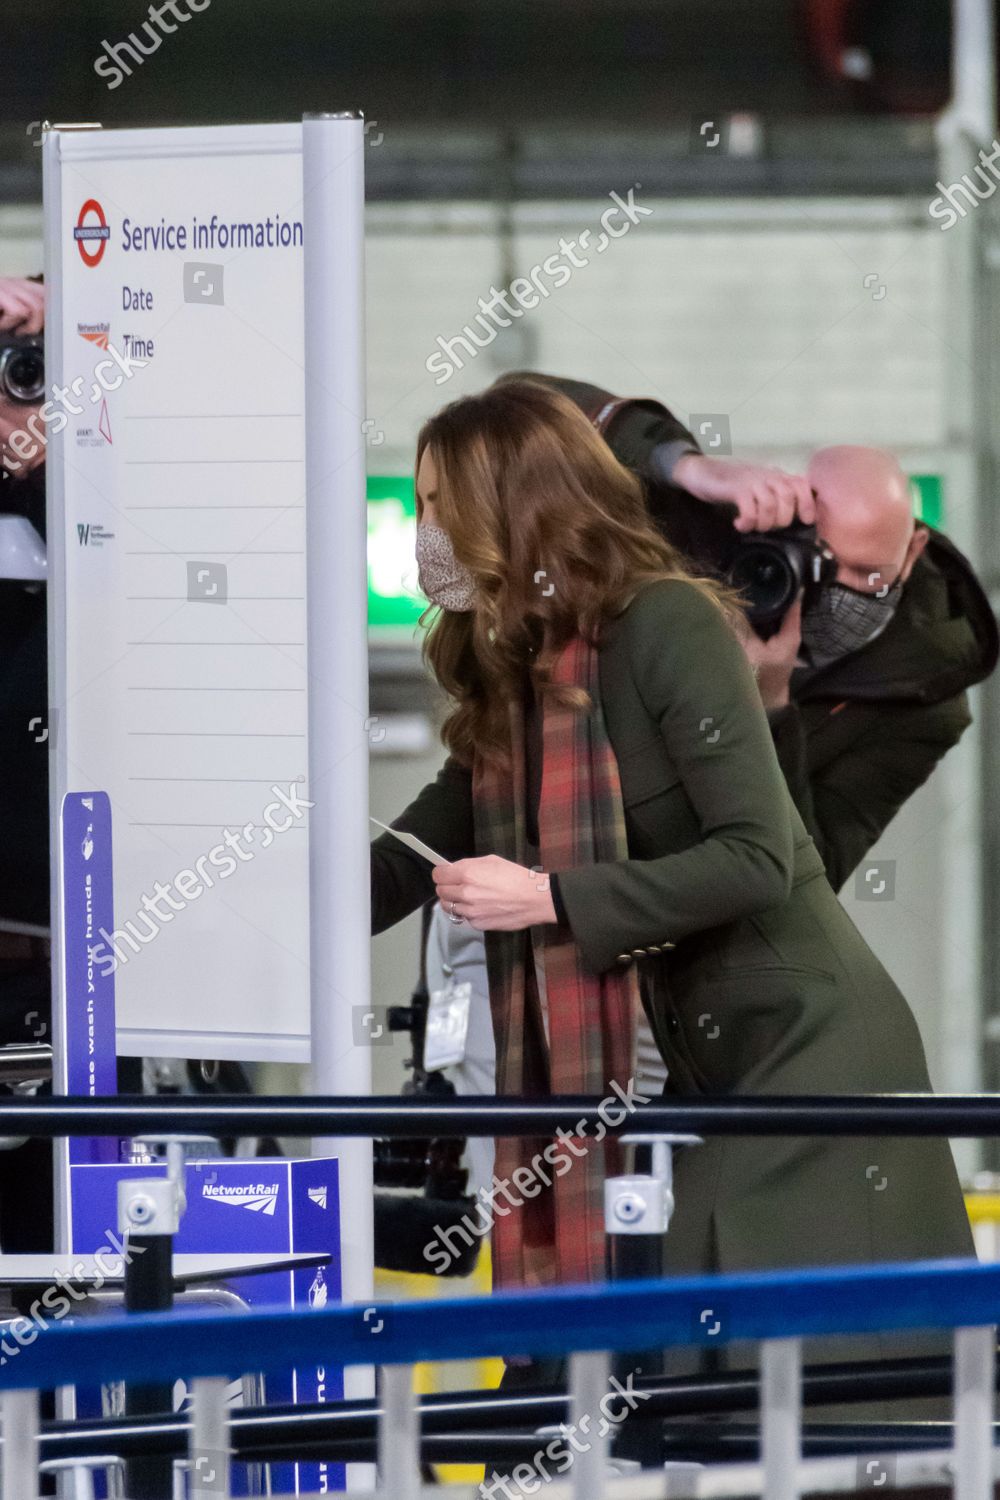 prince-william-and-catherine-duchess-of-cambridge-at-euston-station-london-uk-shutterstock-editorial-11244089be.jpg